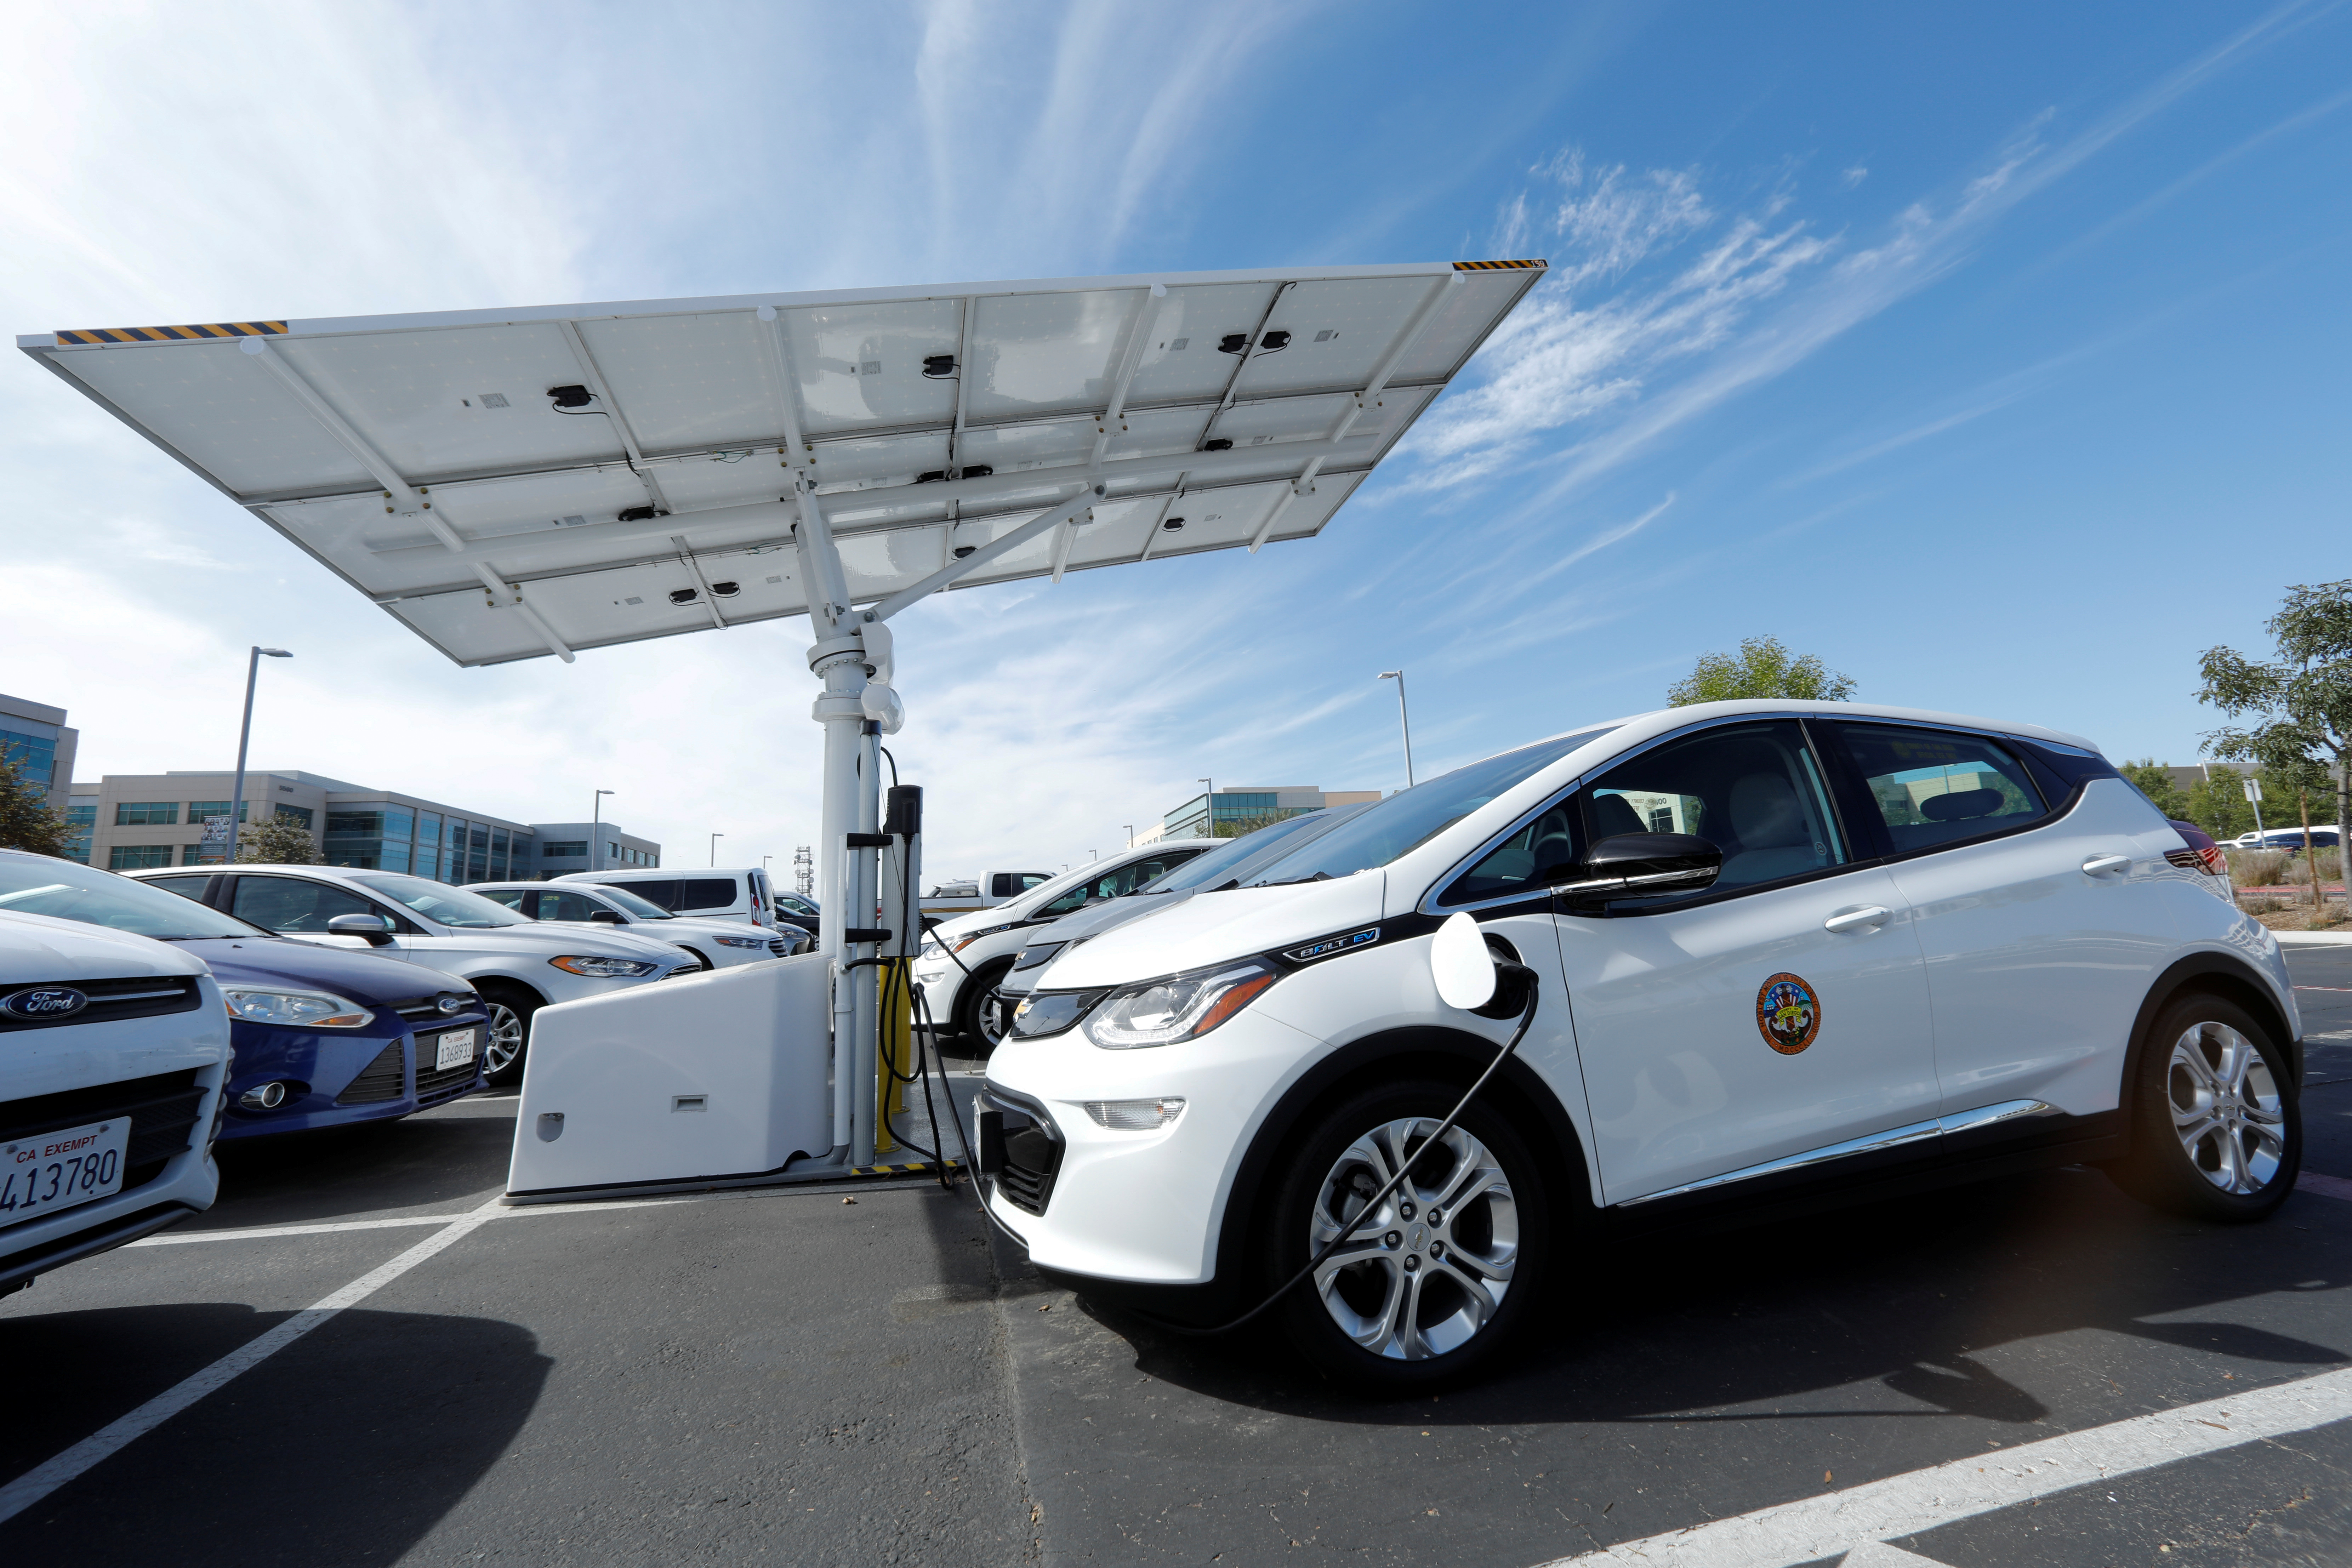 A small fleet of electric Chevrolet Bolt vehicles are charged by a sun tracking  solar panel car charing system in San Diego